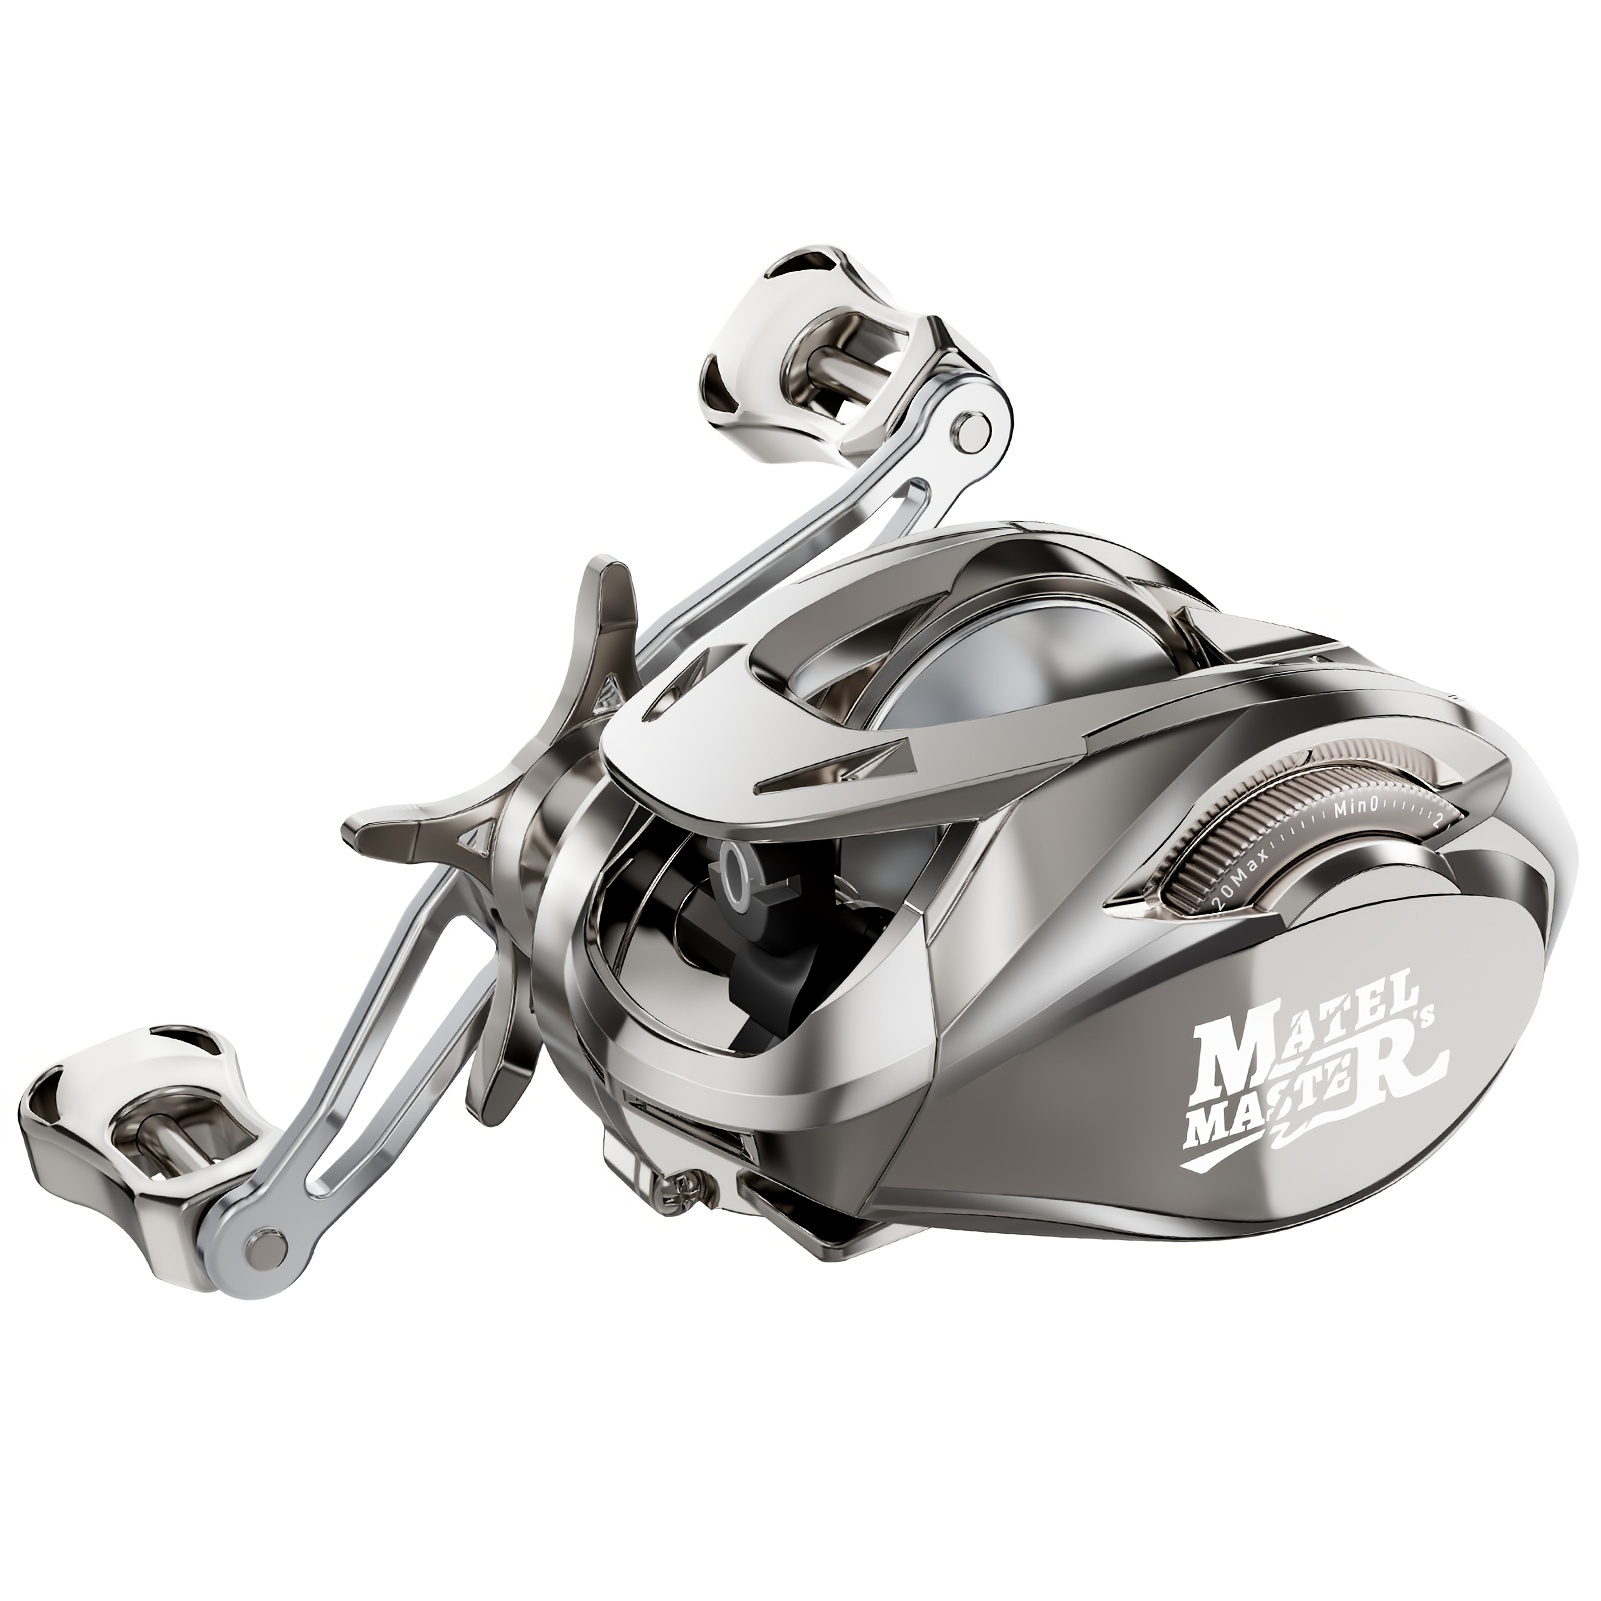 * MATEL MASTER Advanced Baitcaster Reels - 6.2:1 Gear Ratio, 5+1 Ball  Bearing, 12Lb Drag System - Perfect for Saltwater & Freshwater Fishing!